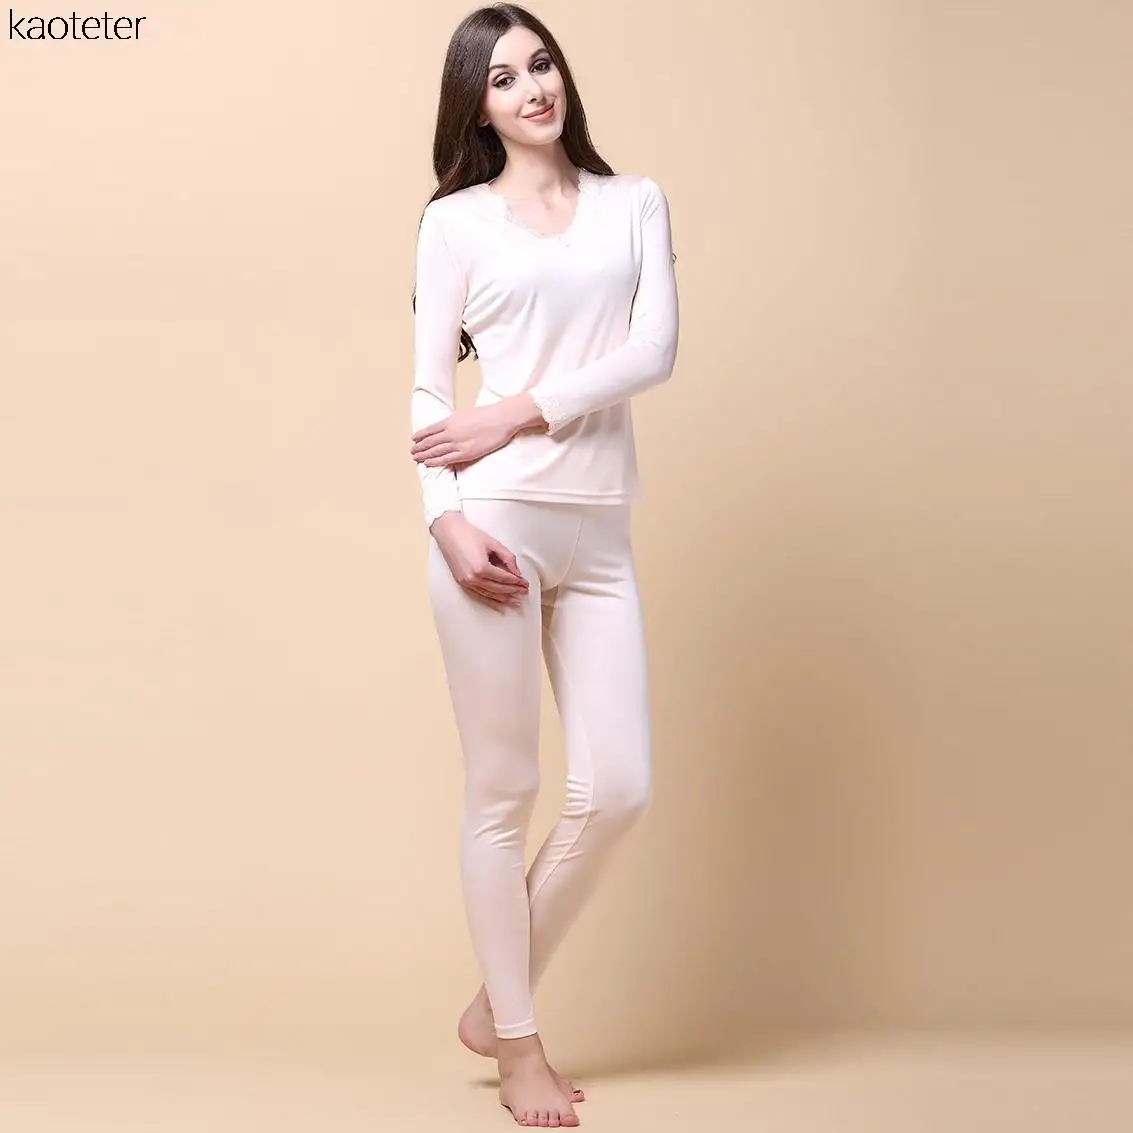 Compare Prices on Ladies Silk Thermal Underwear- Online Shopping ...